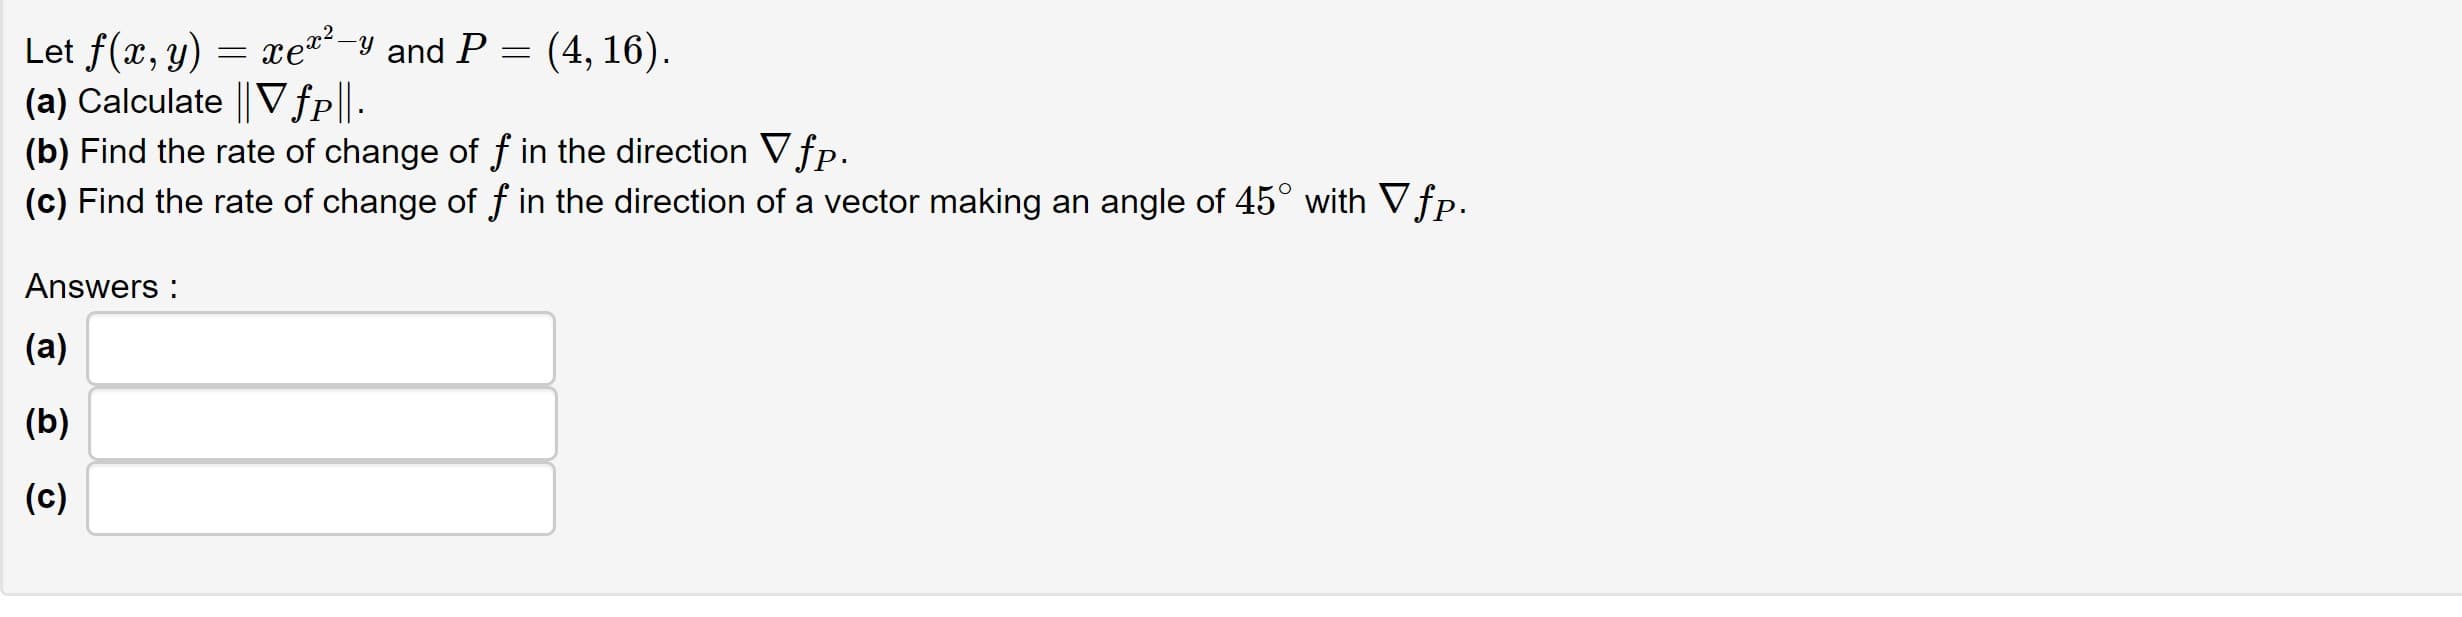 Let f(x, y) = xe-y and P = (4, 16).
(a) Calculate || Vfp||-
(b) Find the rate of change of f in the direction Vfp.
(c) Find the rate of change of f in the direction of a vector making an angle of 45° with V fp.
Answers :
(a)
(b)
(c)
